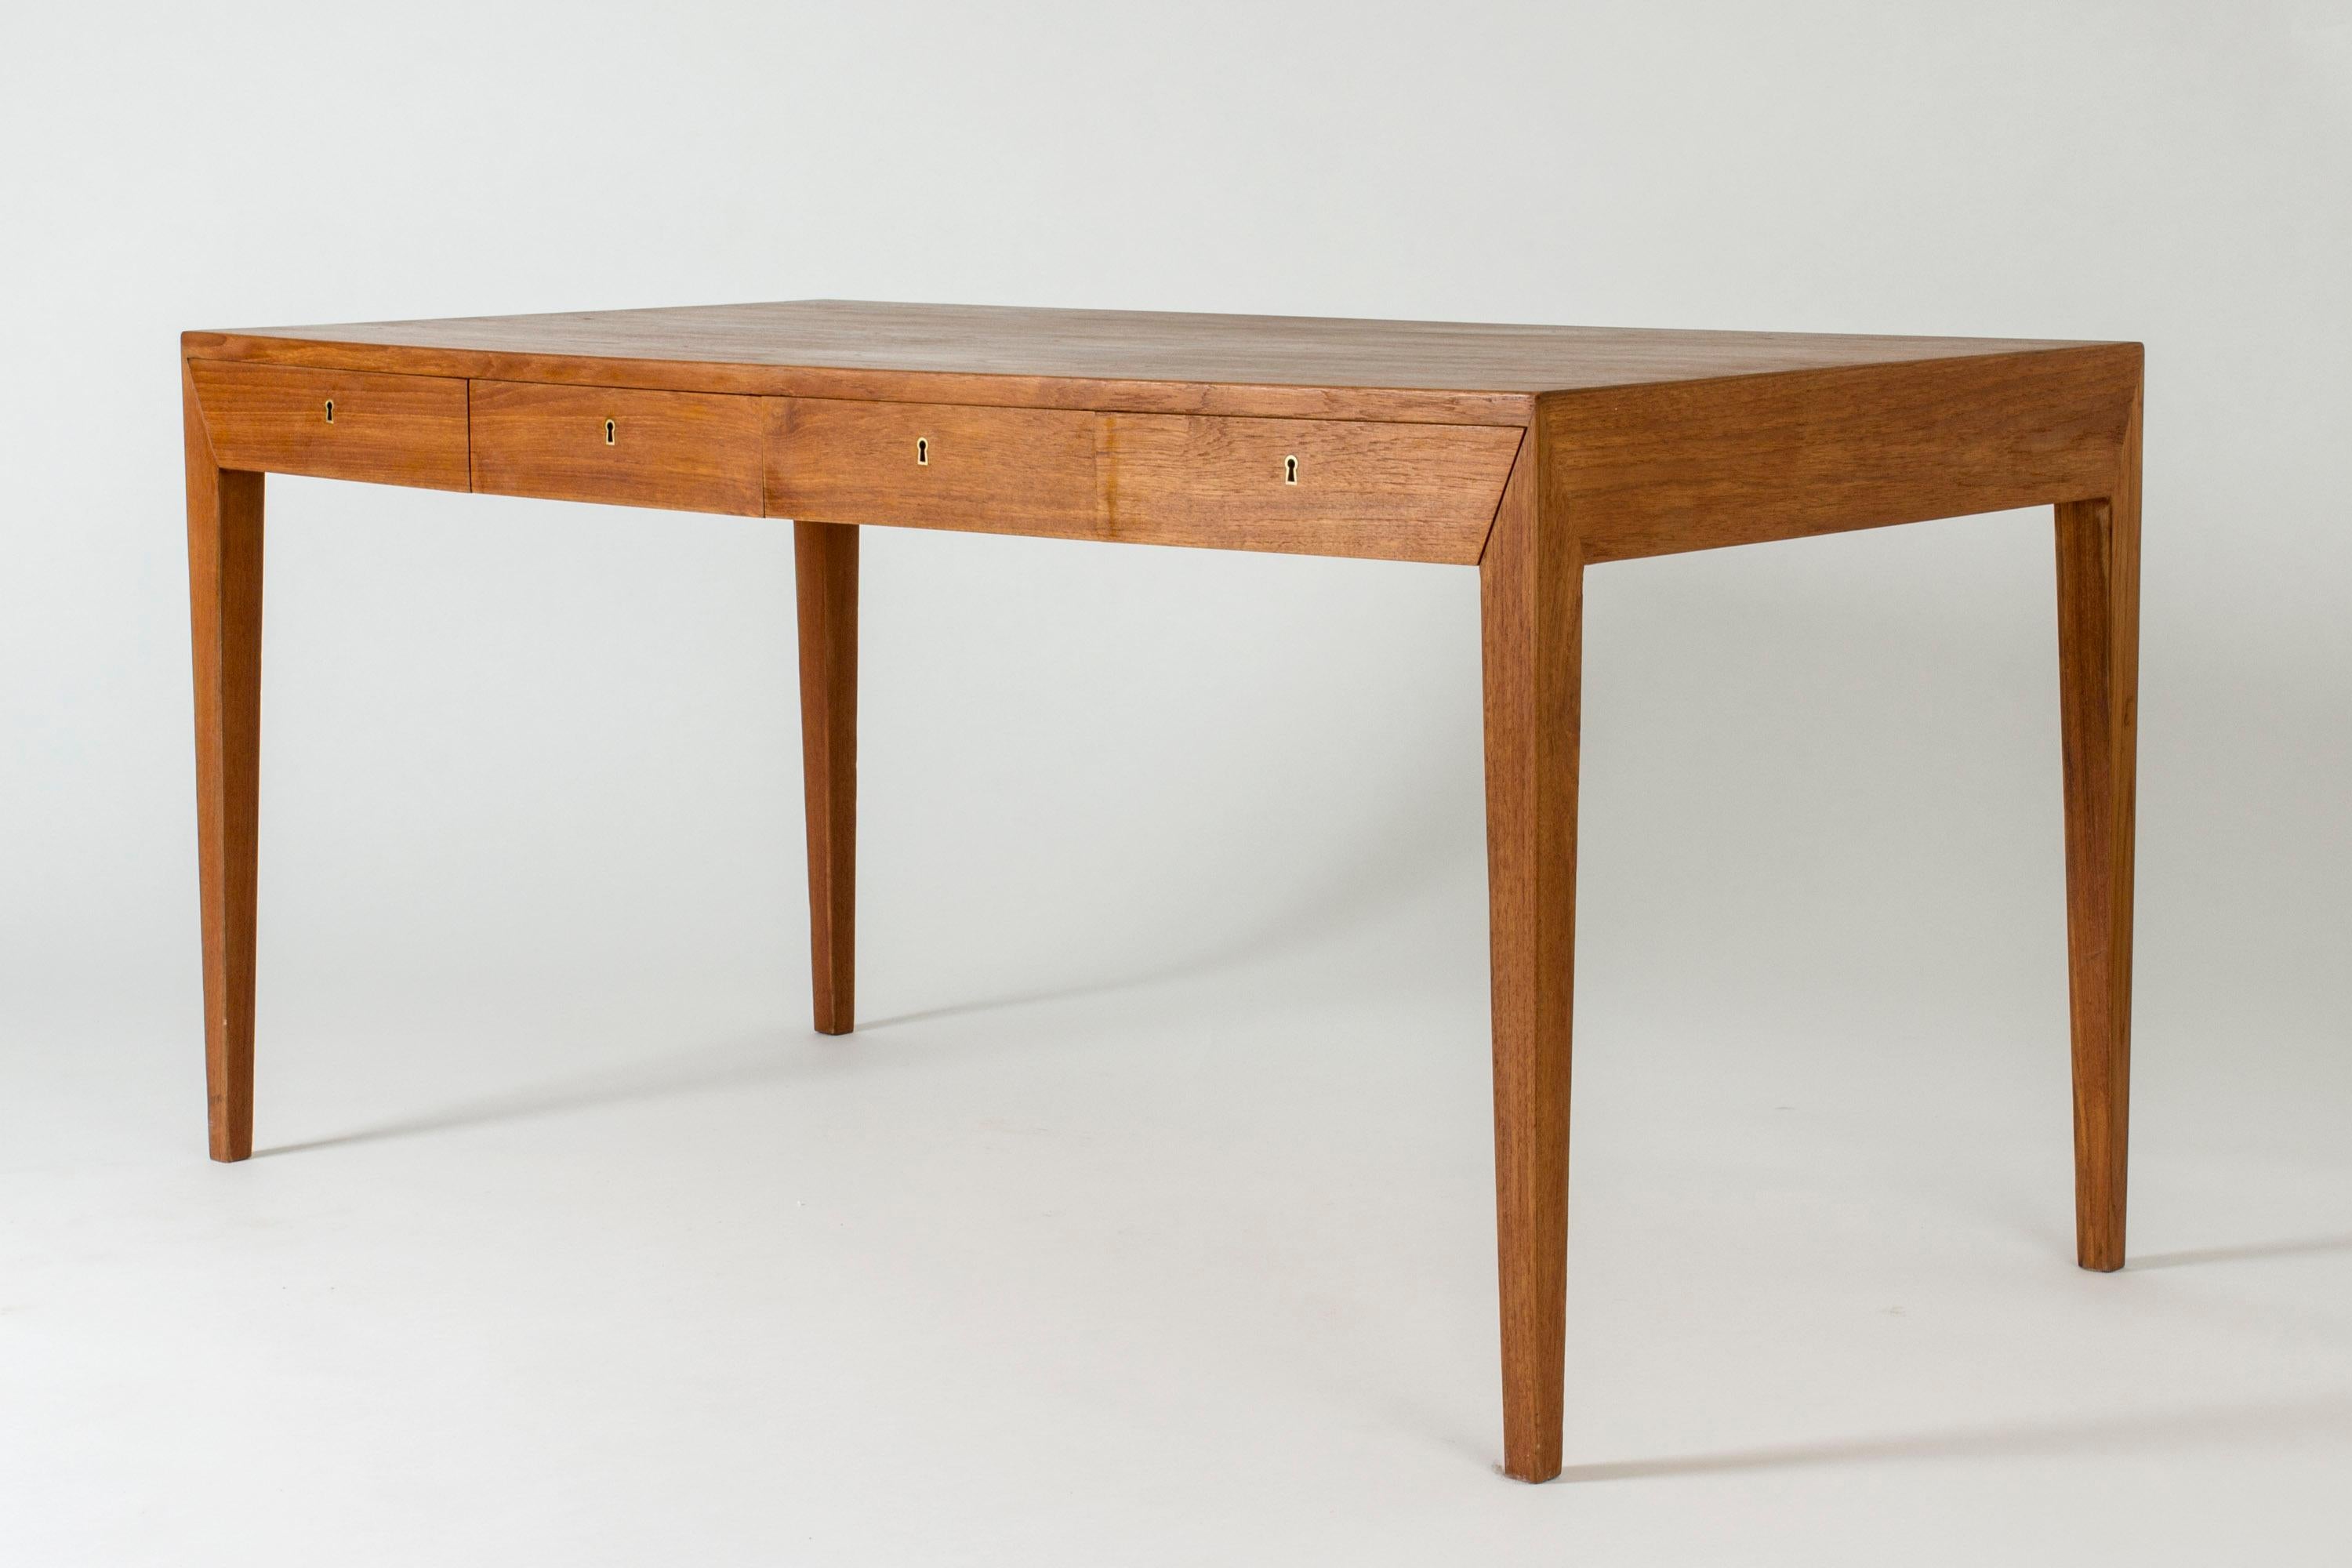 Striking teak desk by Severin Hansen. Great proportions and Severin Hansen’s characteristic diagonal, seamless joinery at the corners. Four drawers with a brass key.